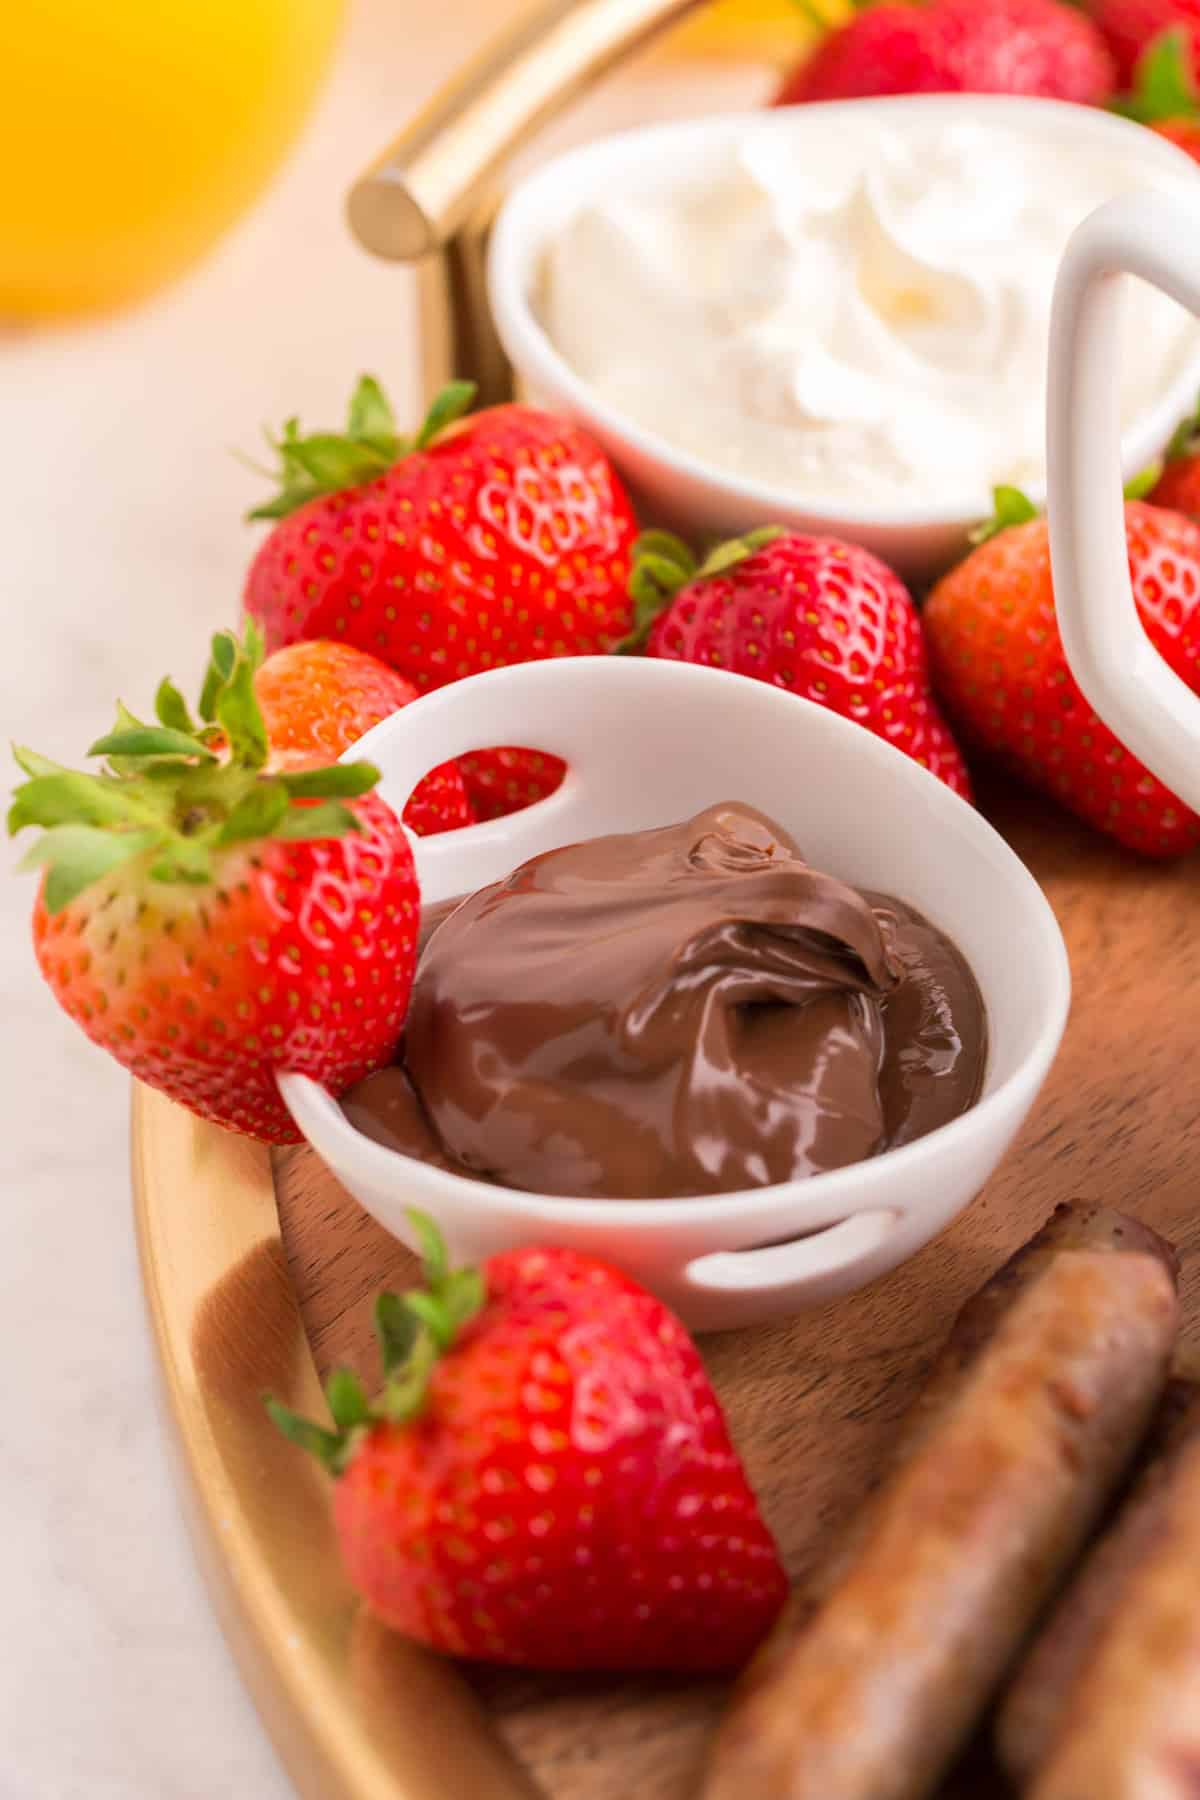 Strawberry on the edge of a bowl of nutella.